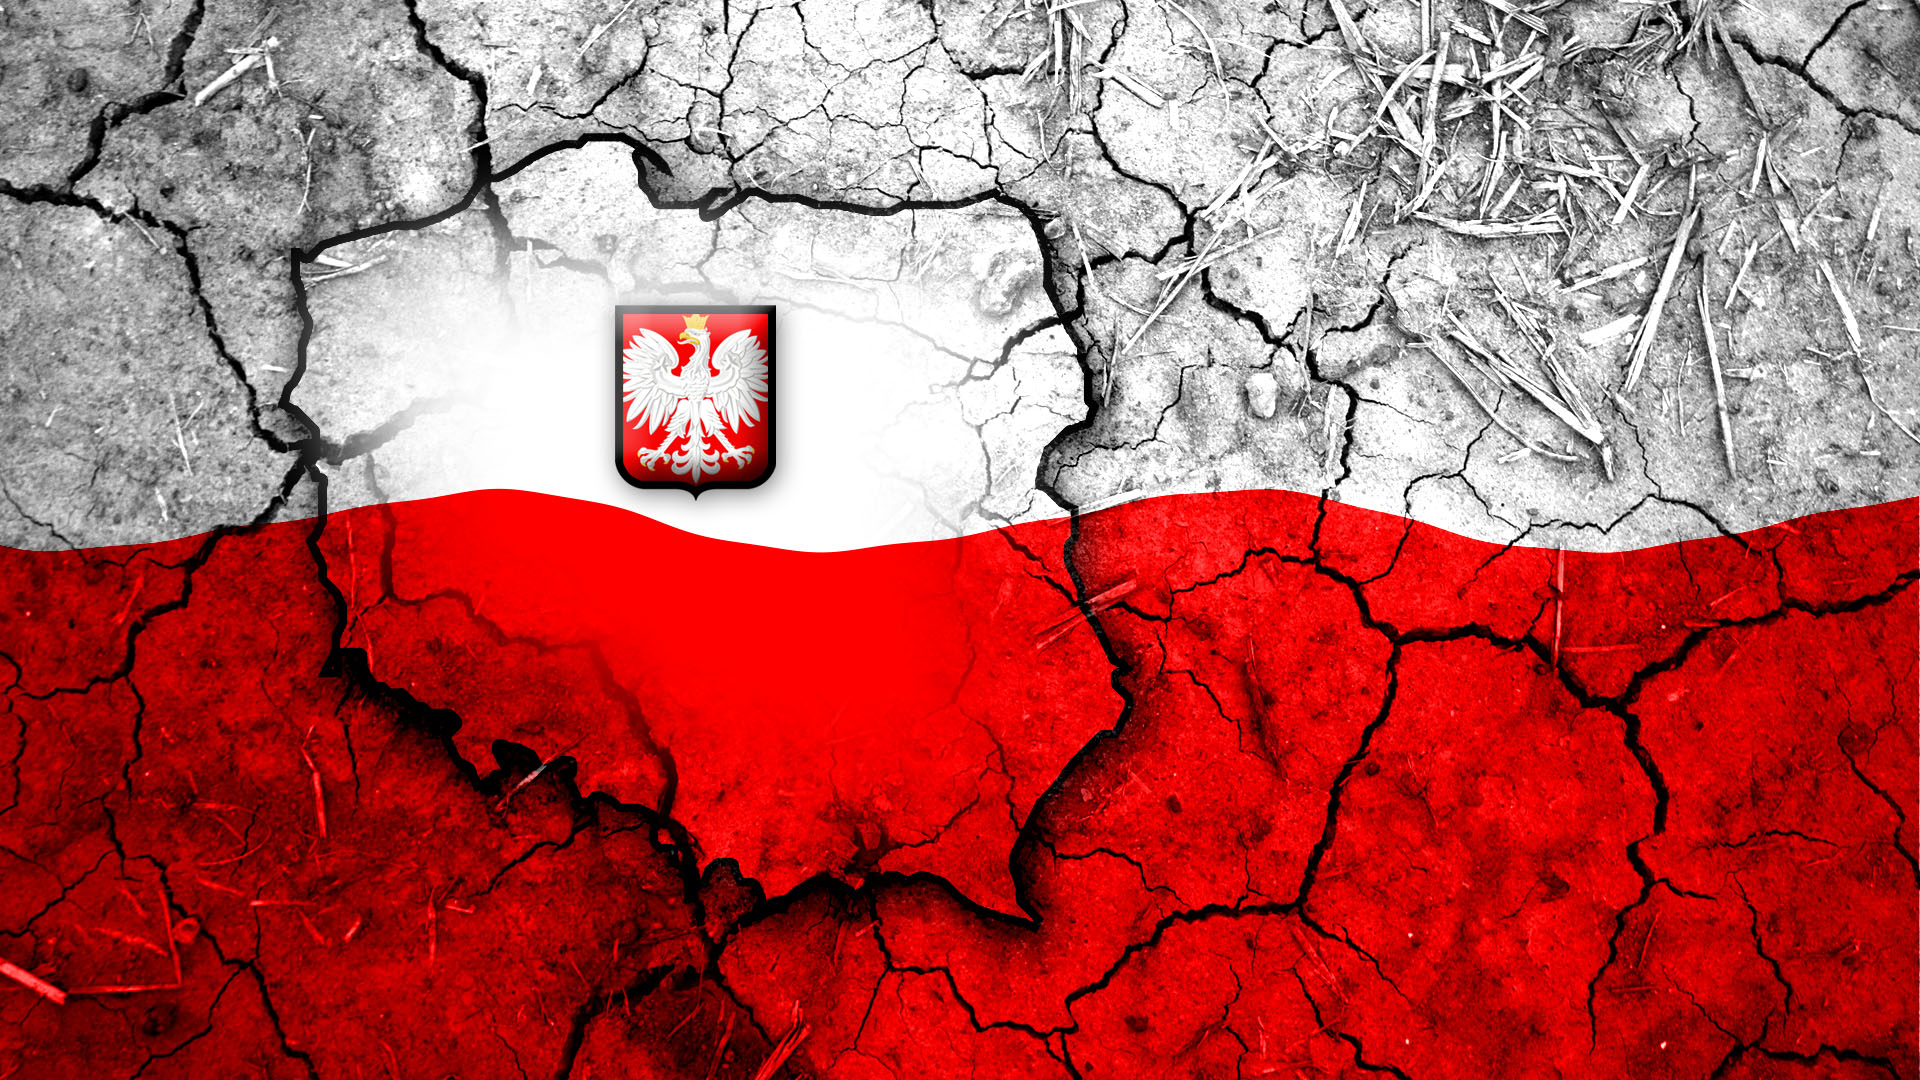 Poland Wallpaper for iPhone Free PNG ImageIllustoon